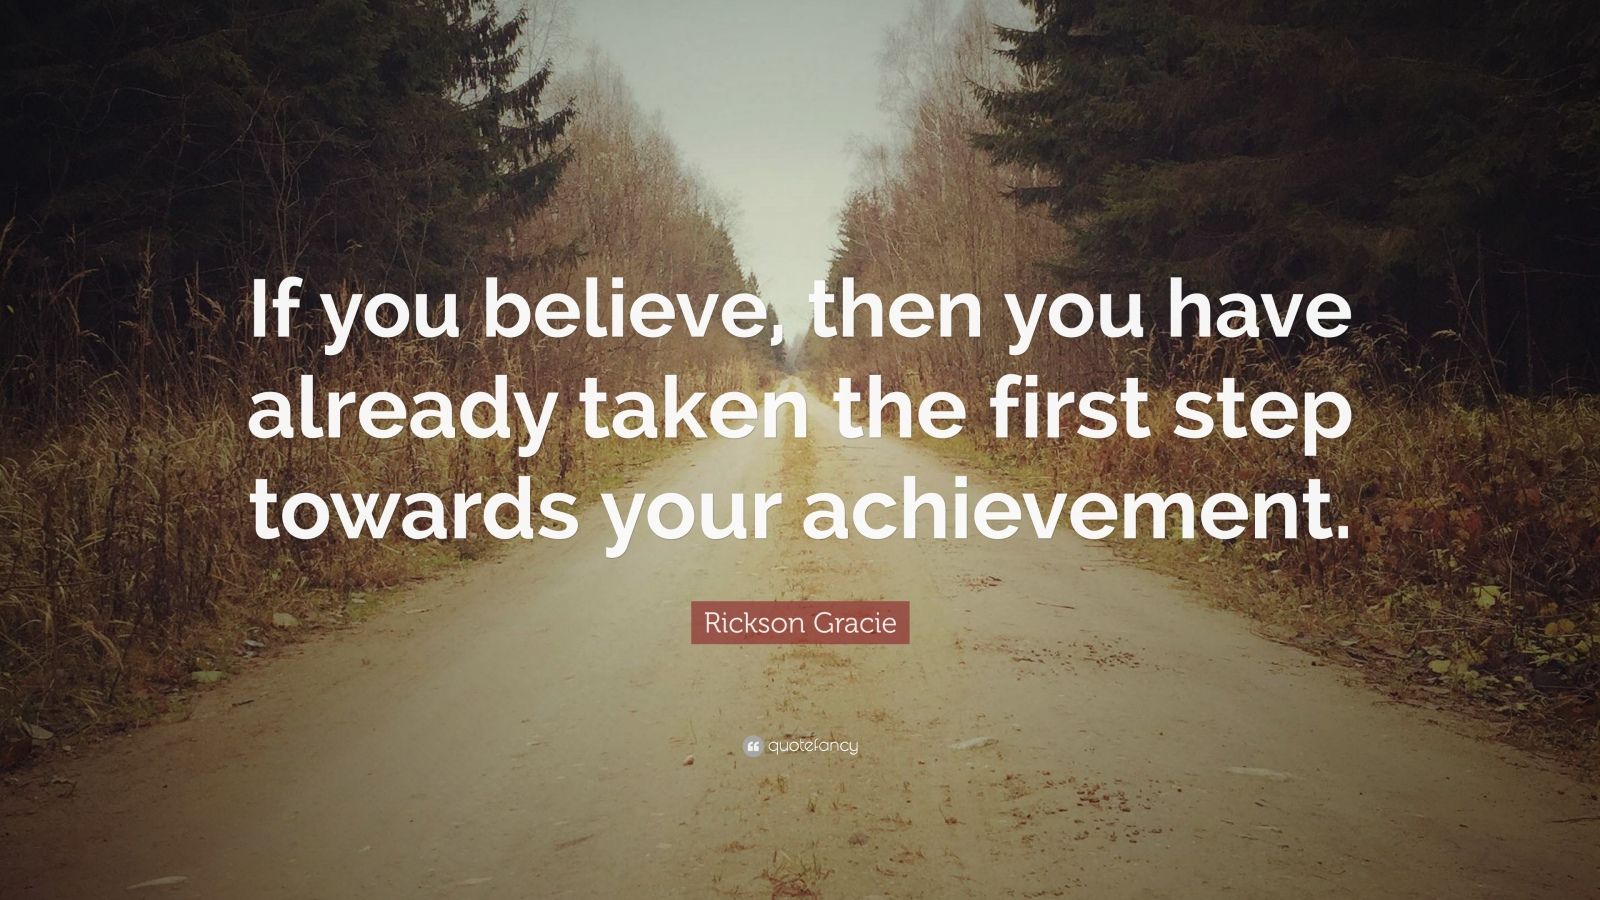 Rickson Gracie Quote: “If you believe, then you have already taken the ...